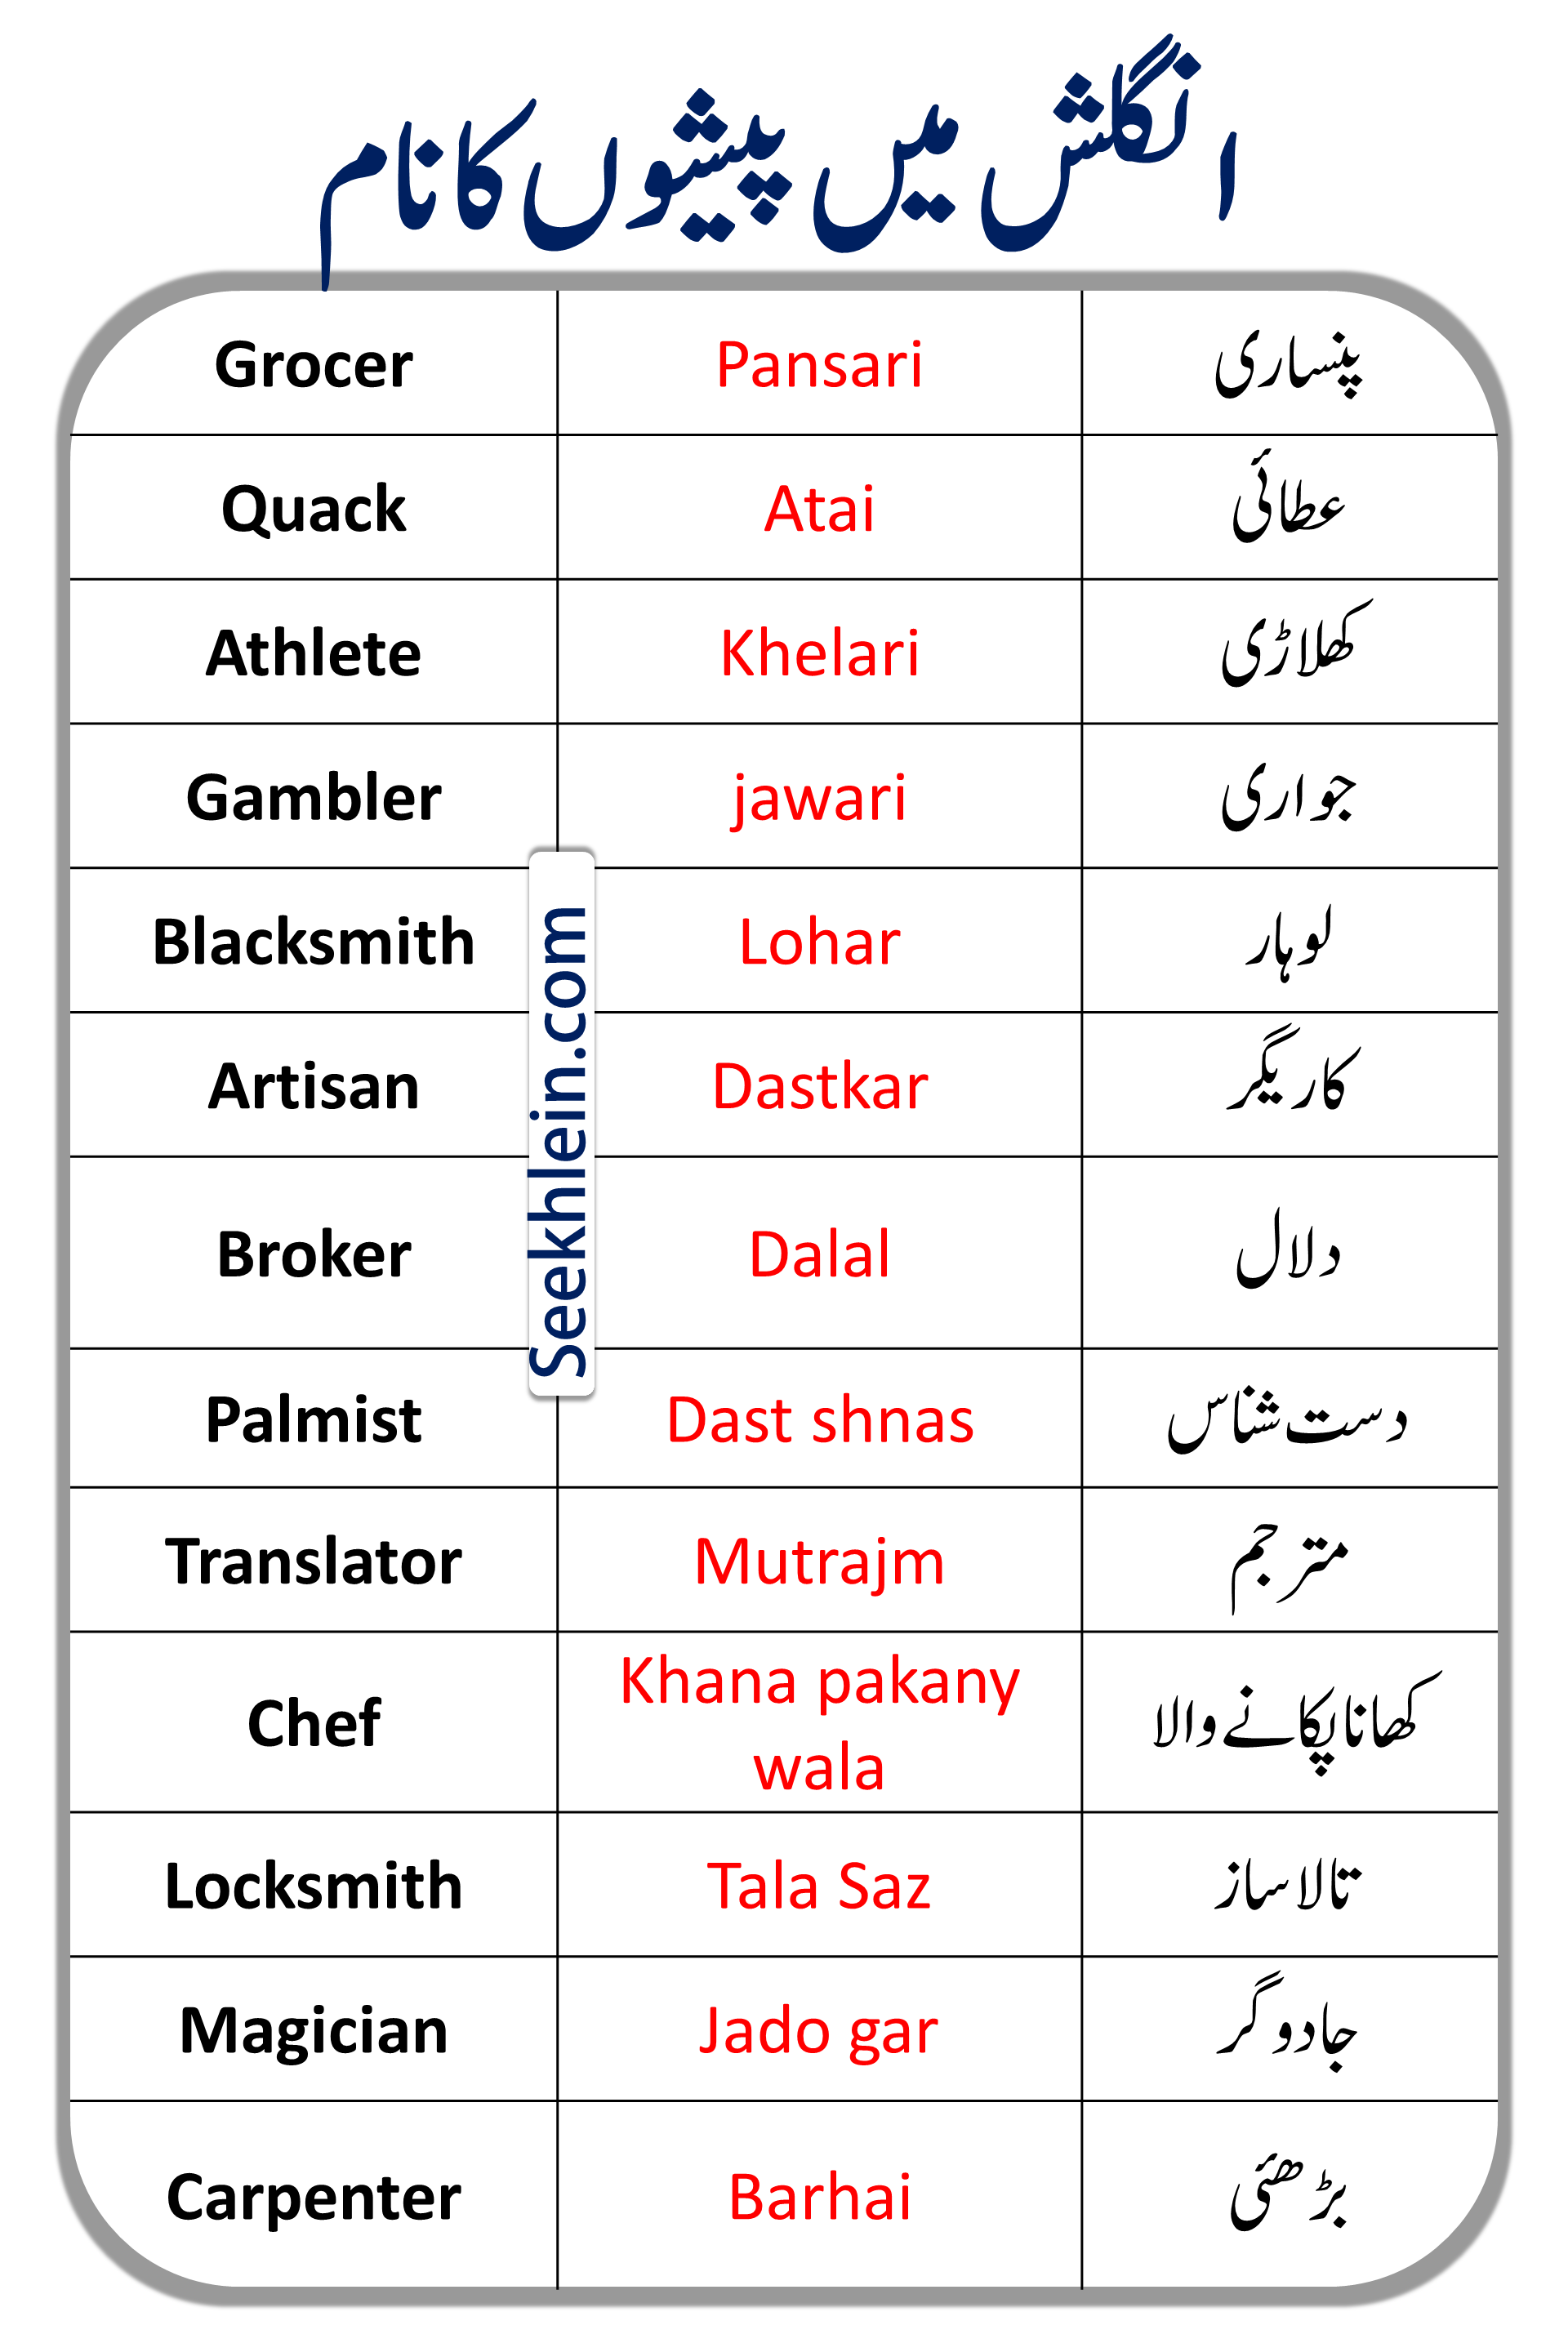 Occupation And Names In English To Urdu Grocer, Quack